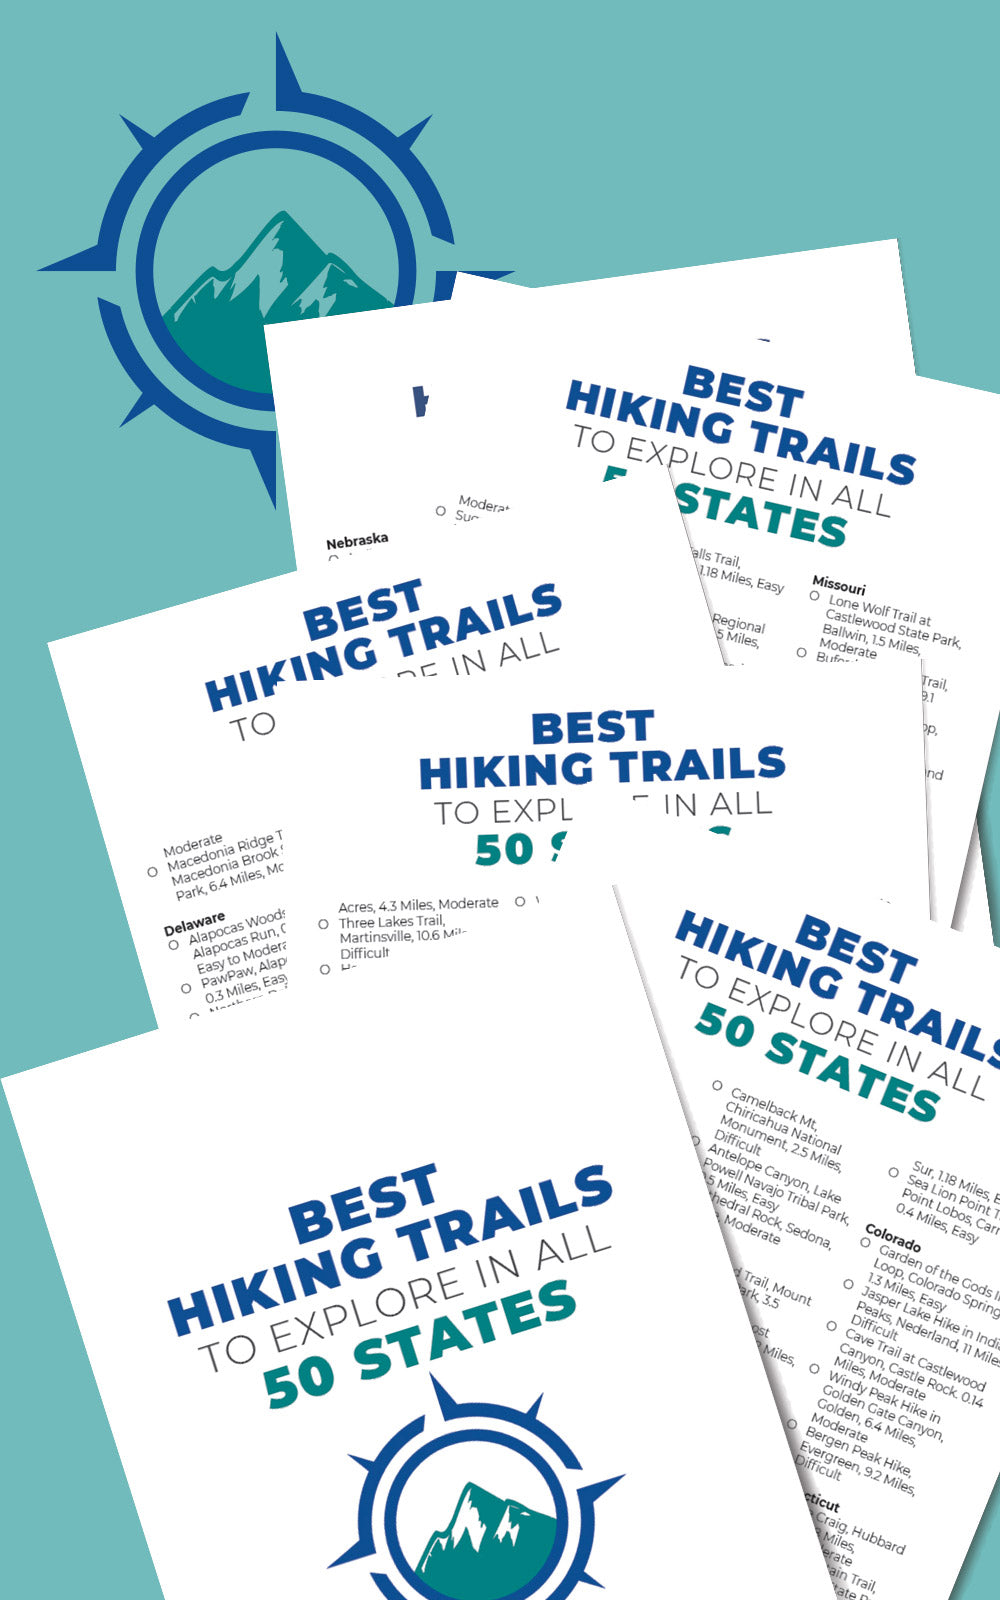 Best Hiking Trails to Explore in All 50 States!